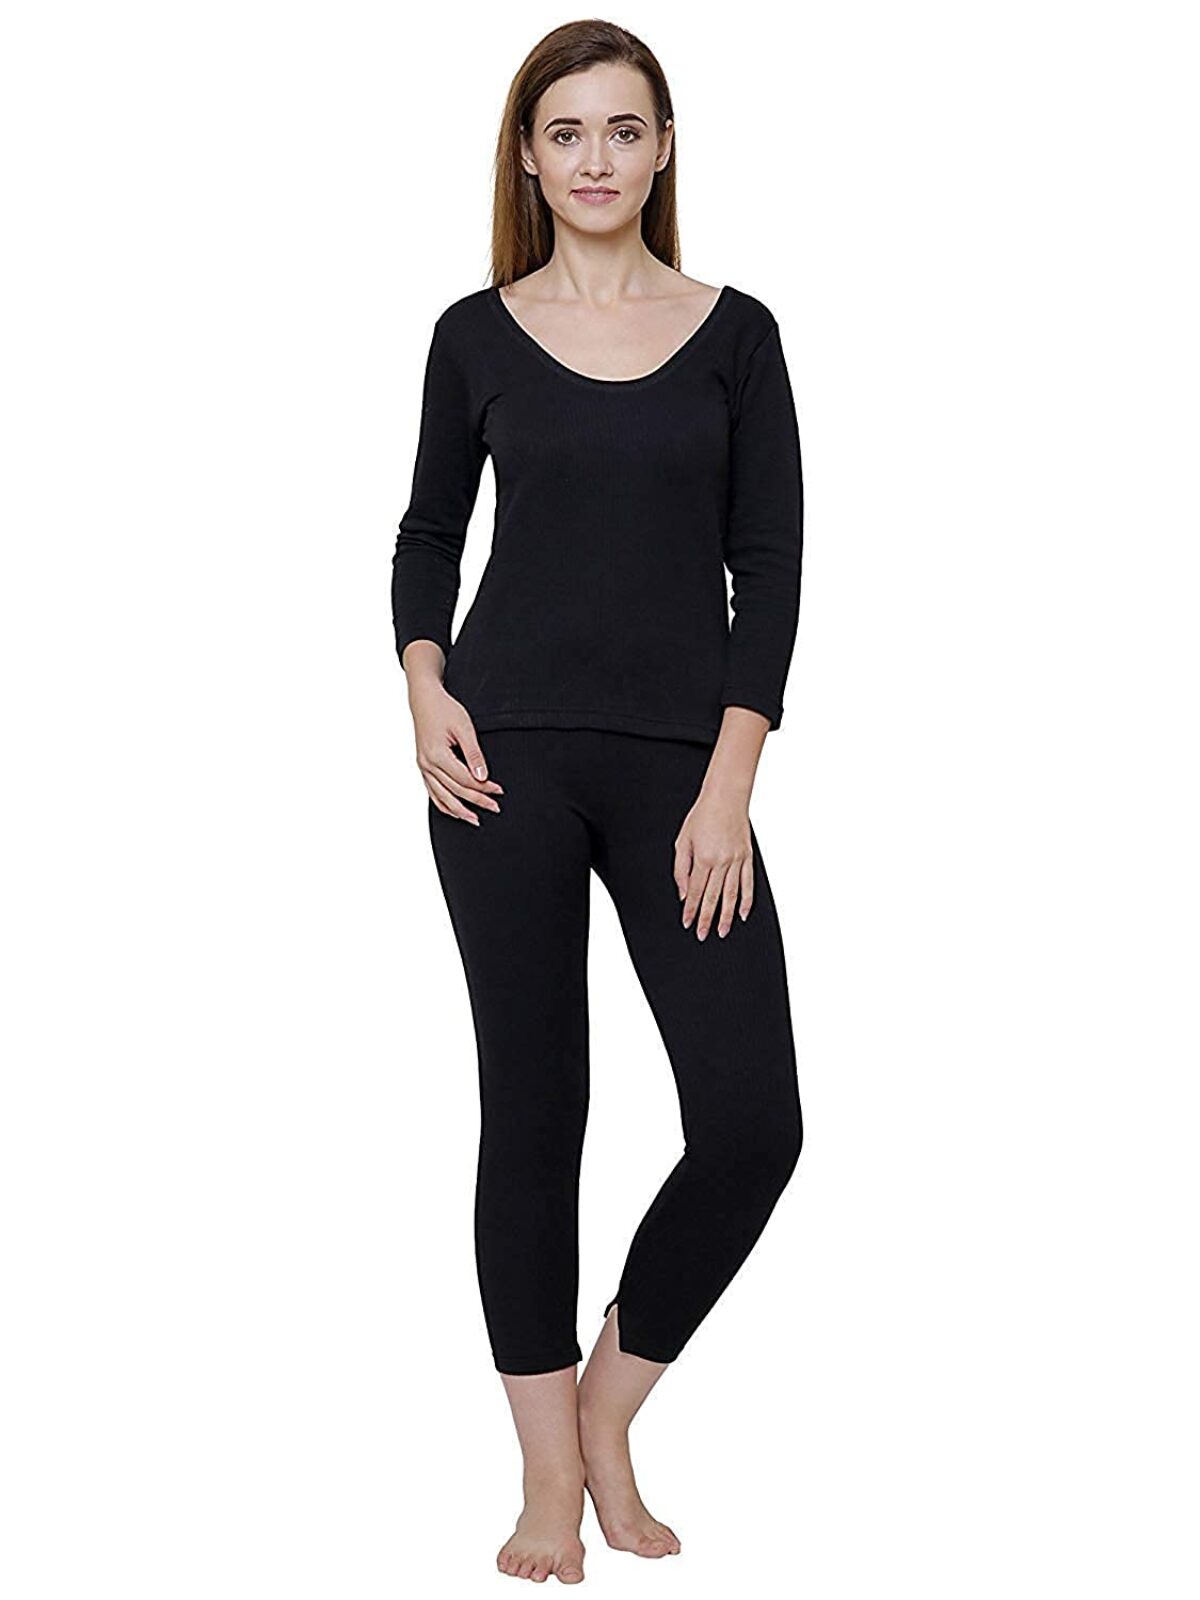 OYQQ BODY WARMER Women Top - Pyjama Set Thermal - Buy OYQQ BODY WARMER  Women Top - Pyjama Set Thermal Online at Best Prices in India | Flipkart.com